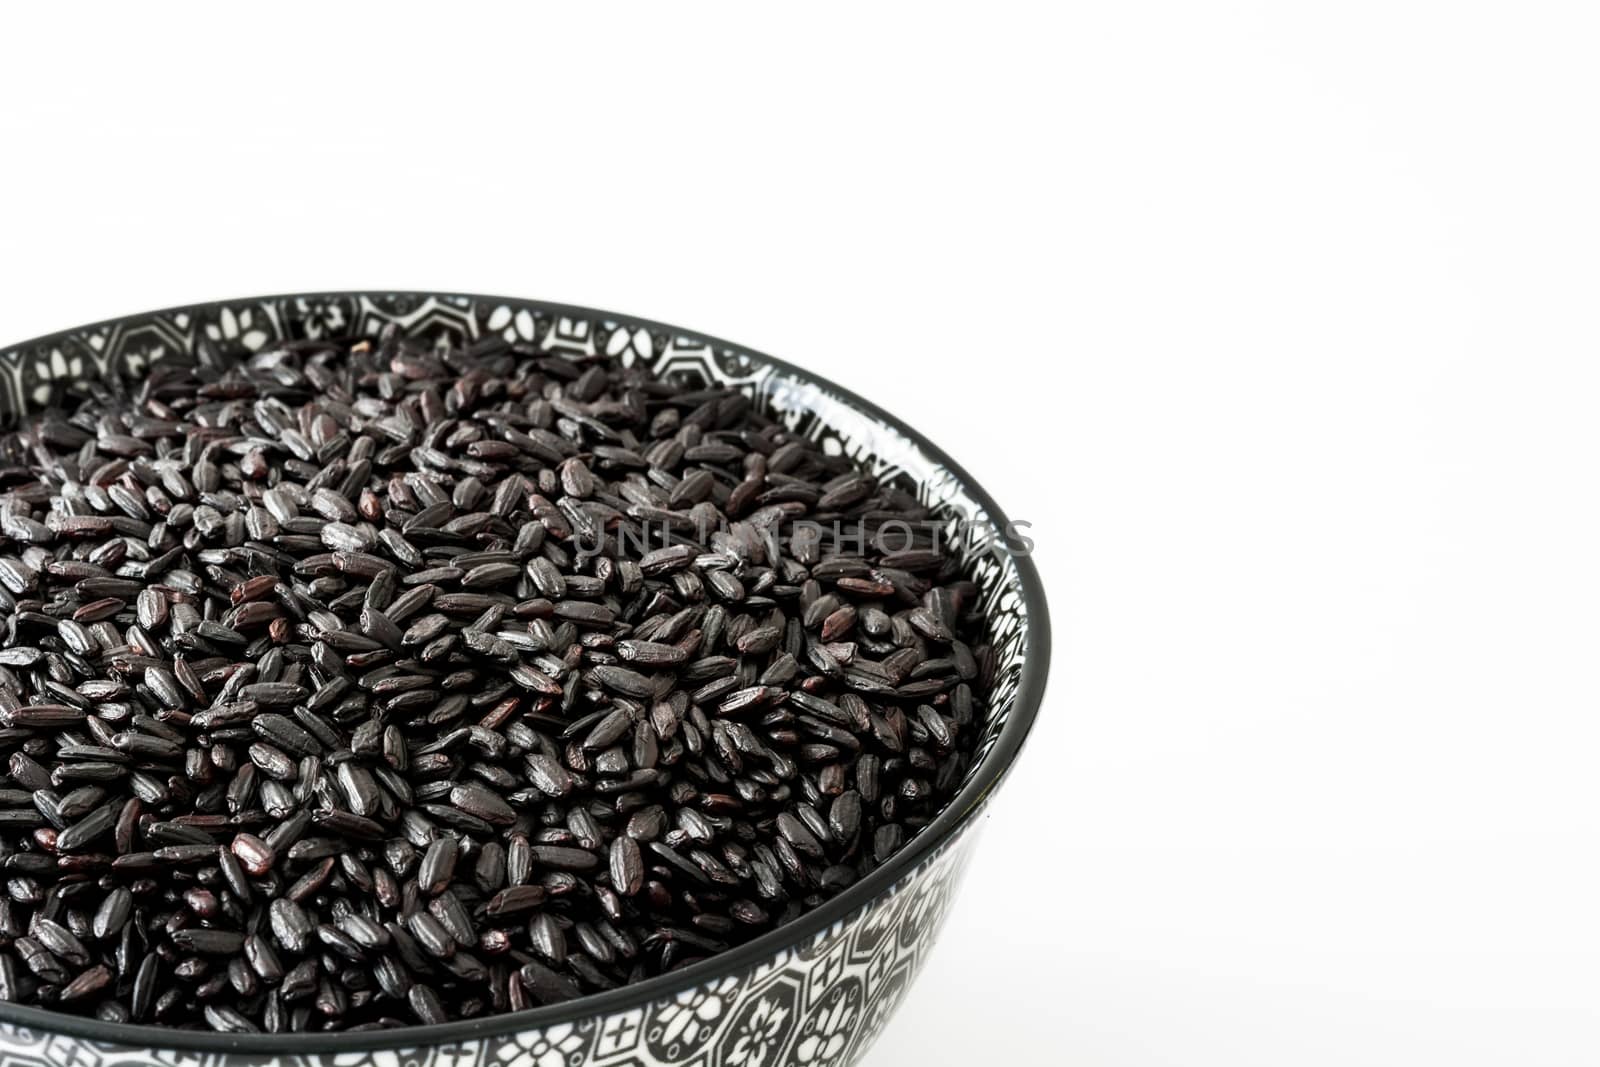 Raw black rice in a bowl isolated on white background by chandlervid85